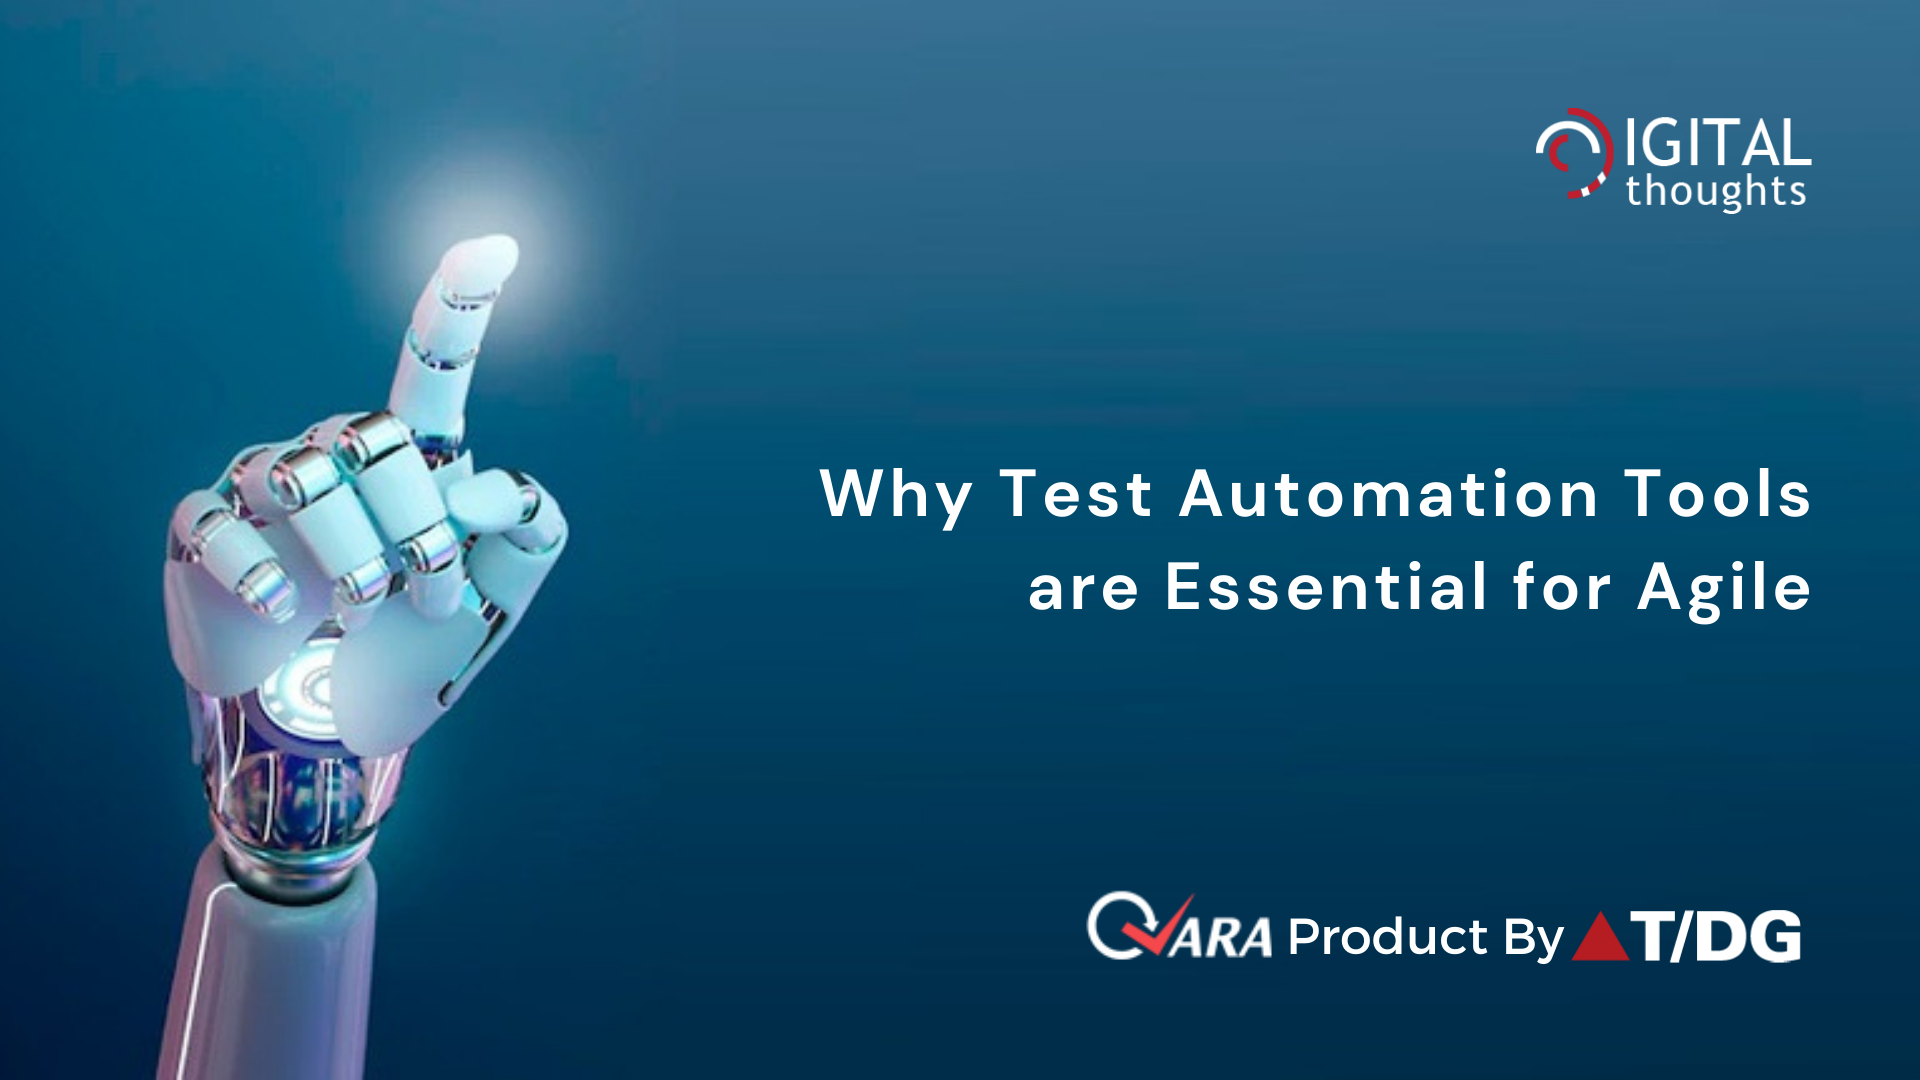 Why Test Automation Tools are Essential for Agile